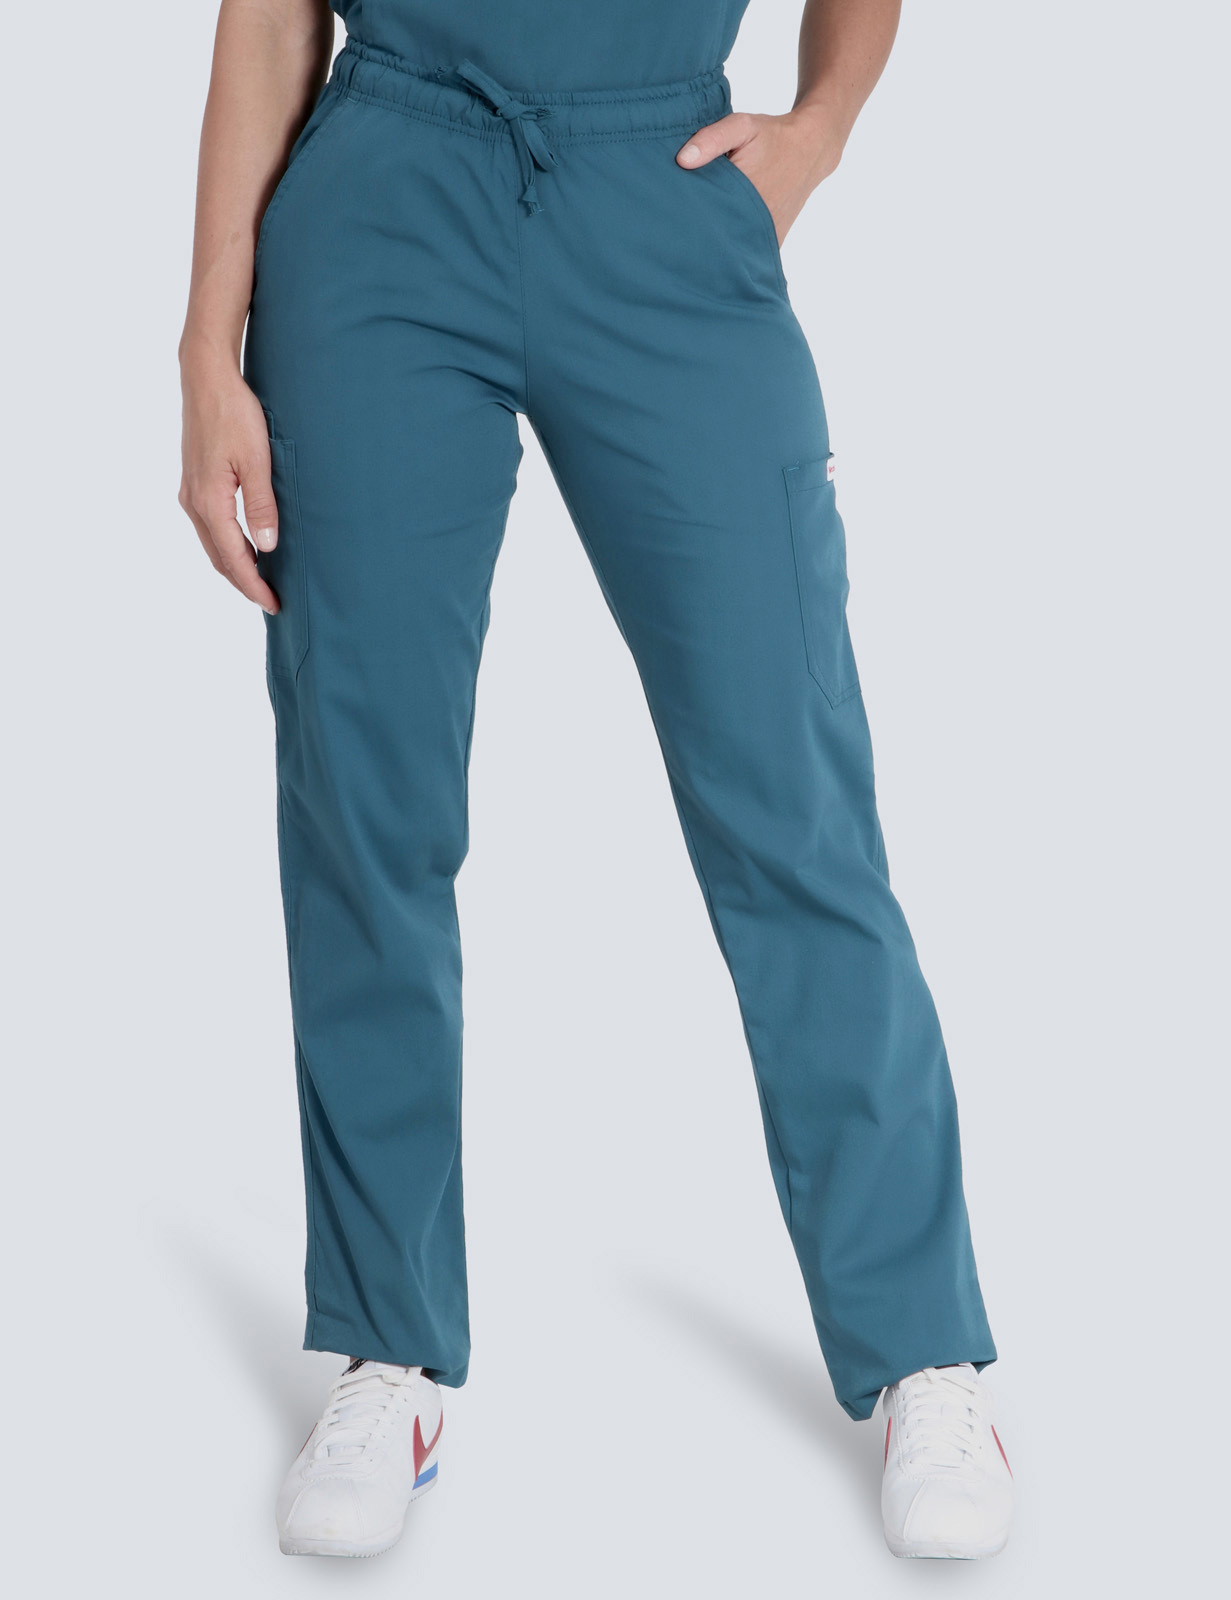 Cargo Pants - St. Vincent's Medical Imaging Nuclear Medicine (pants only) (Cargo Pants in Caribbean)